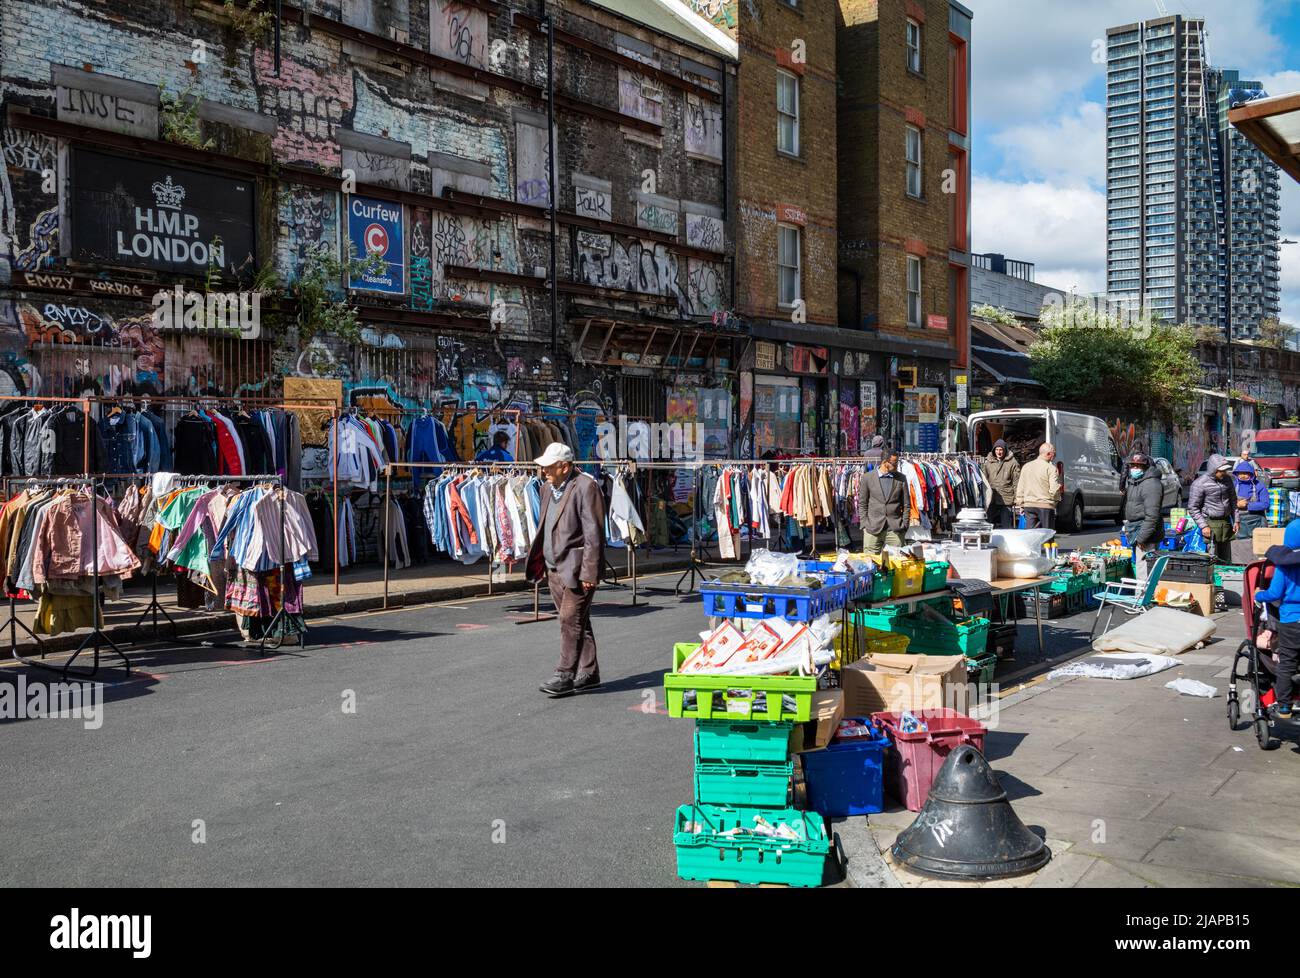 An elderly man walks past a second hand clothes stall at Brick Lane Market in East London, UK Stock Photo